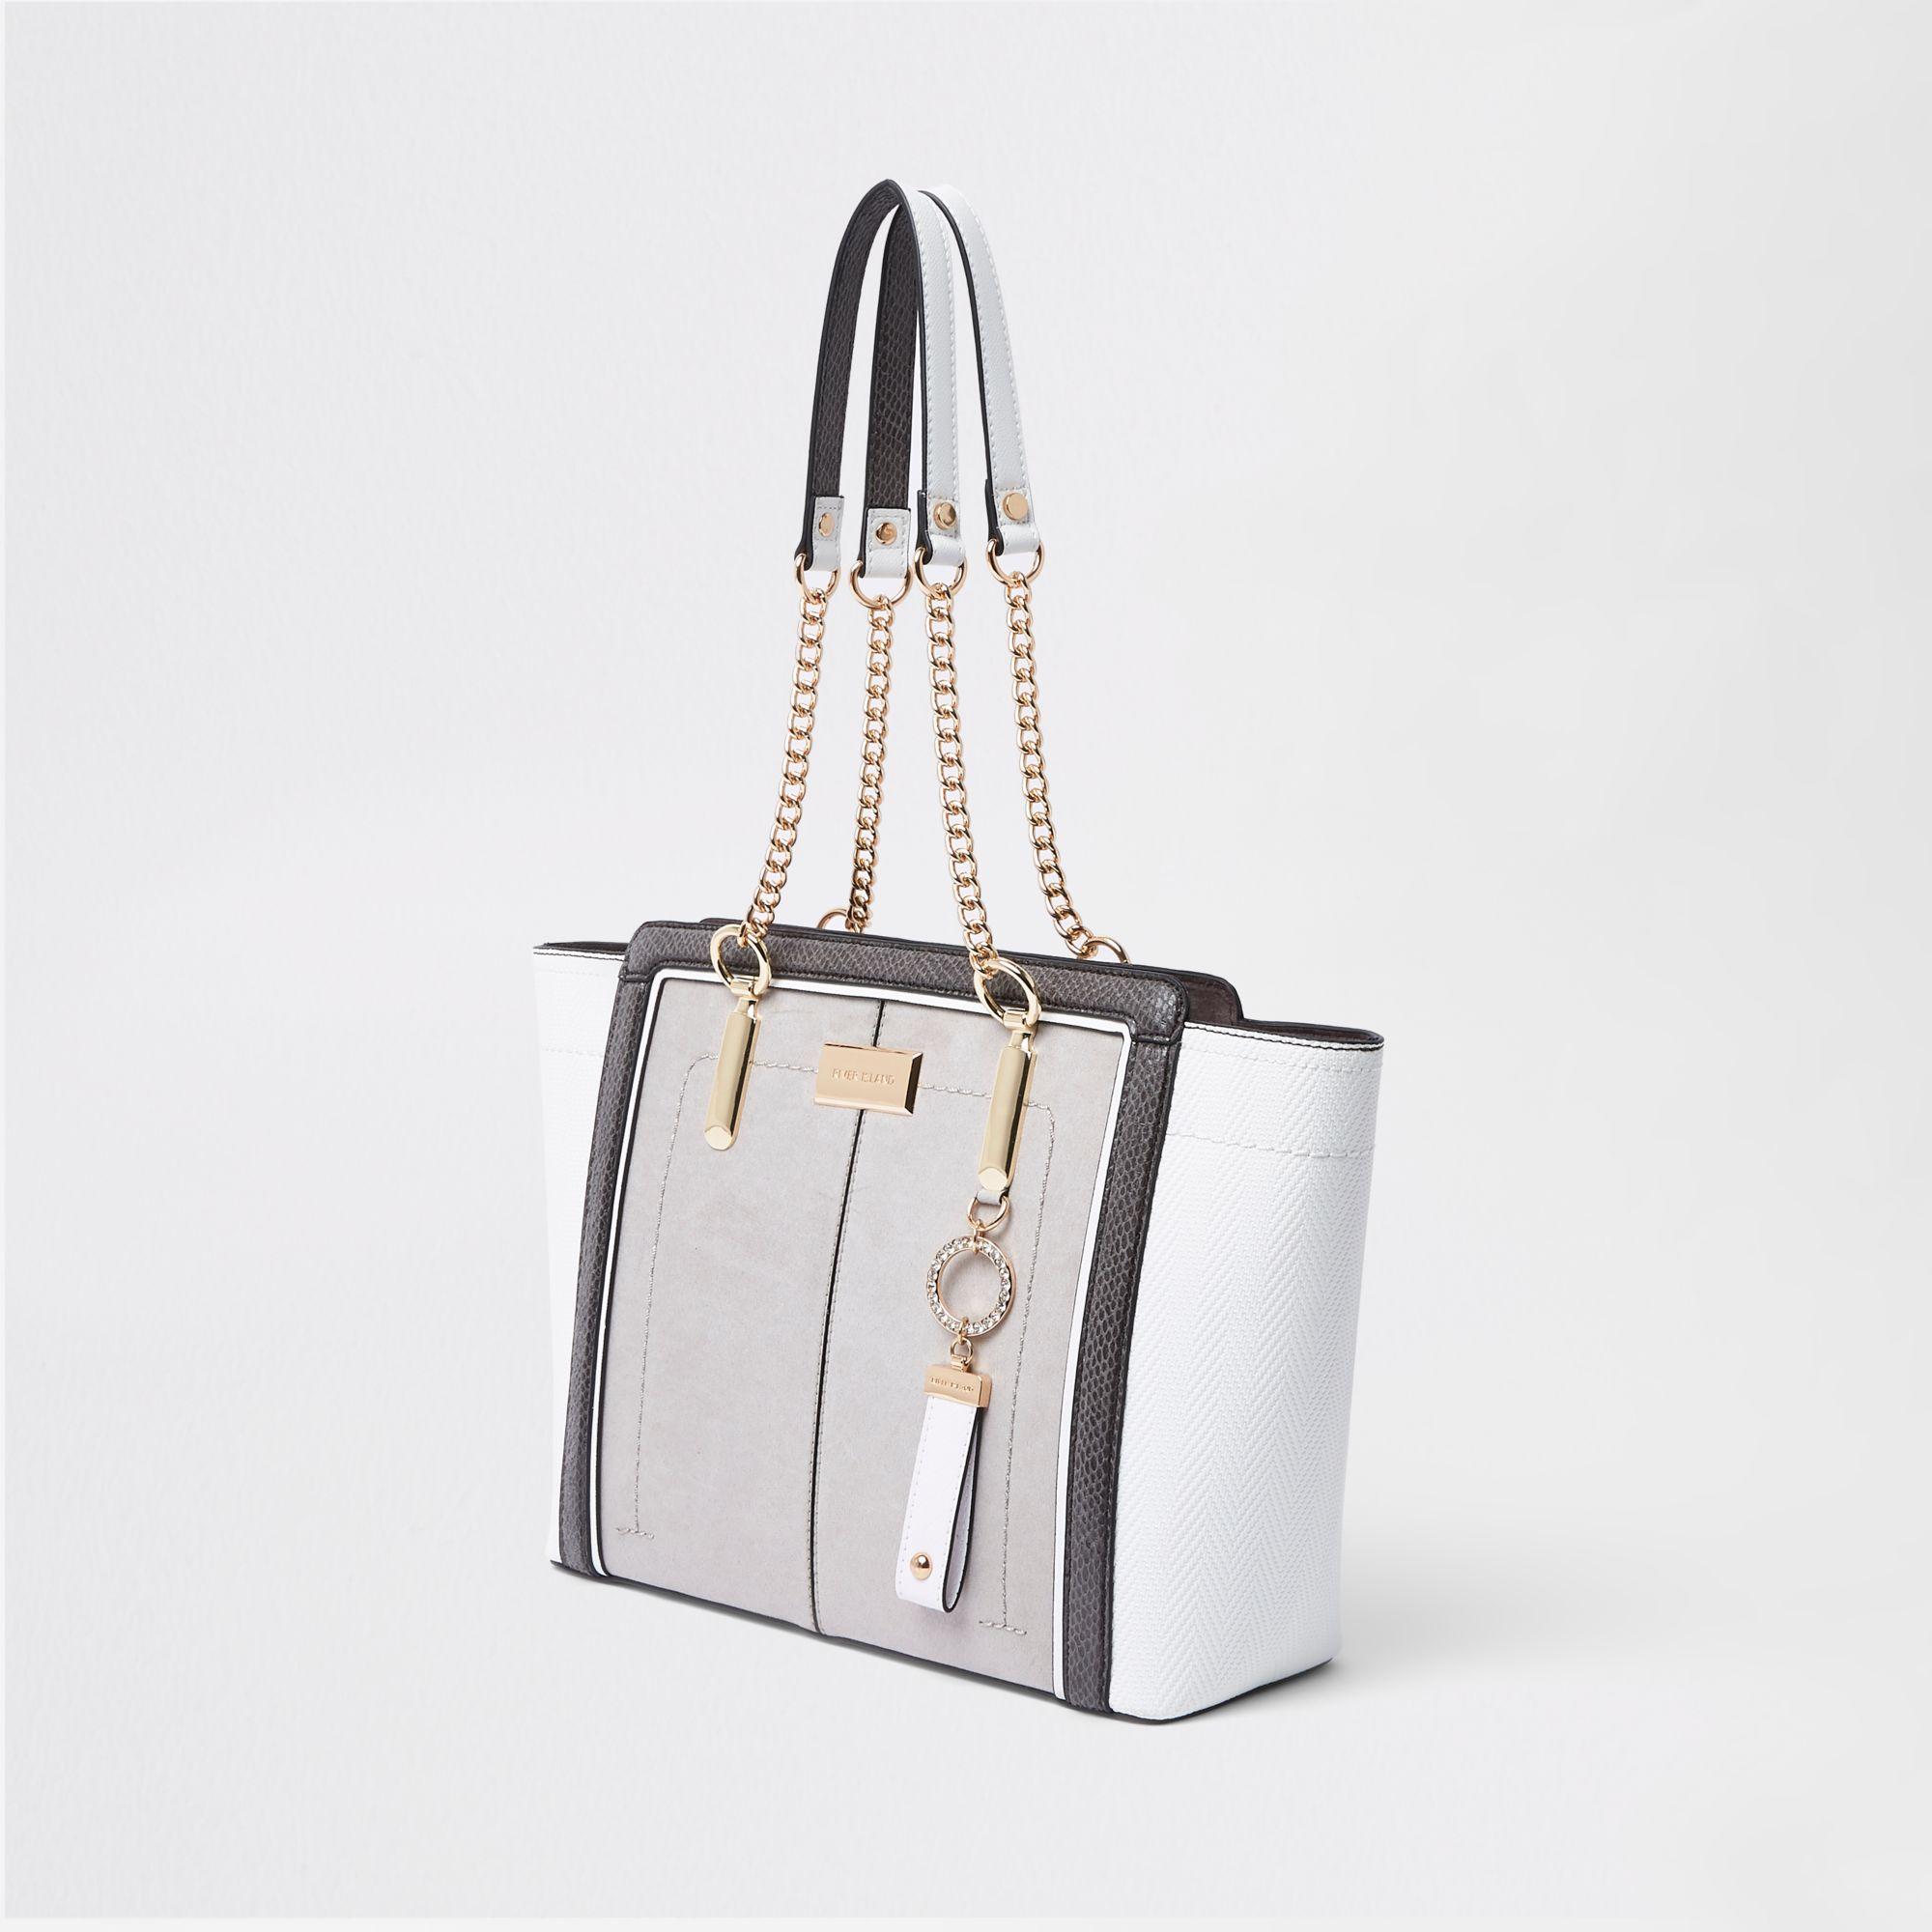 River Island Light Grey Winged Chain Handle Tote Bag in Gray - Lyst